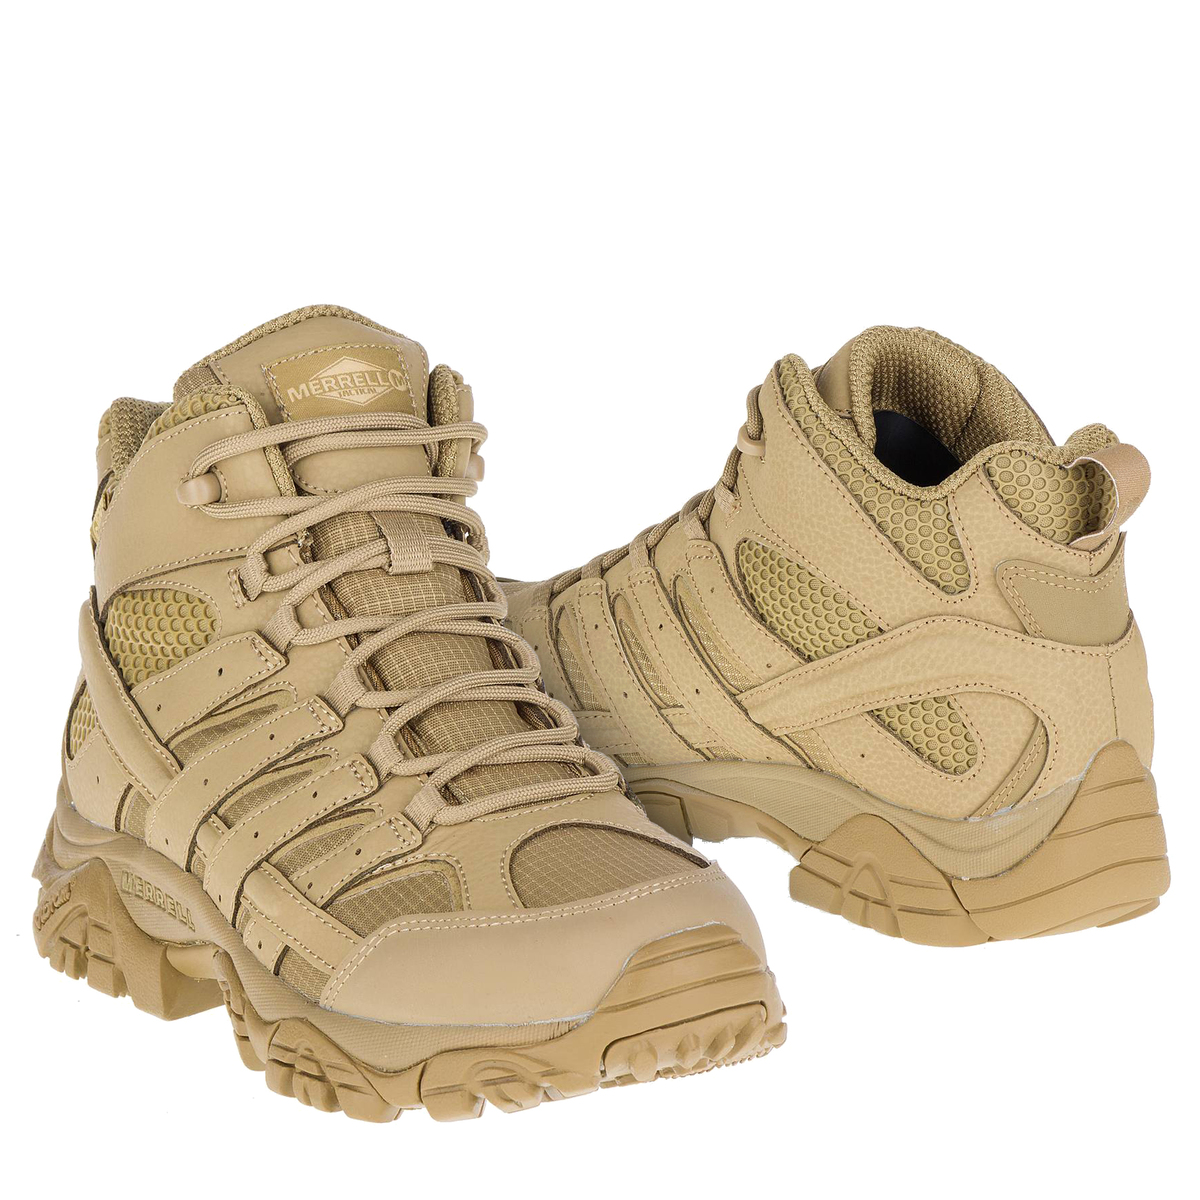 merrell military boots